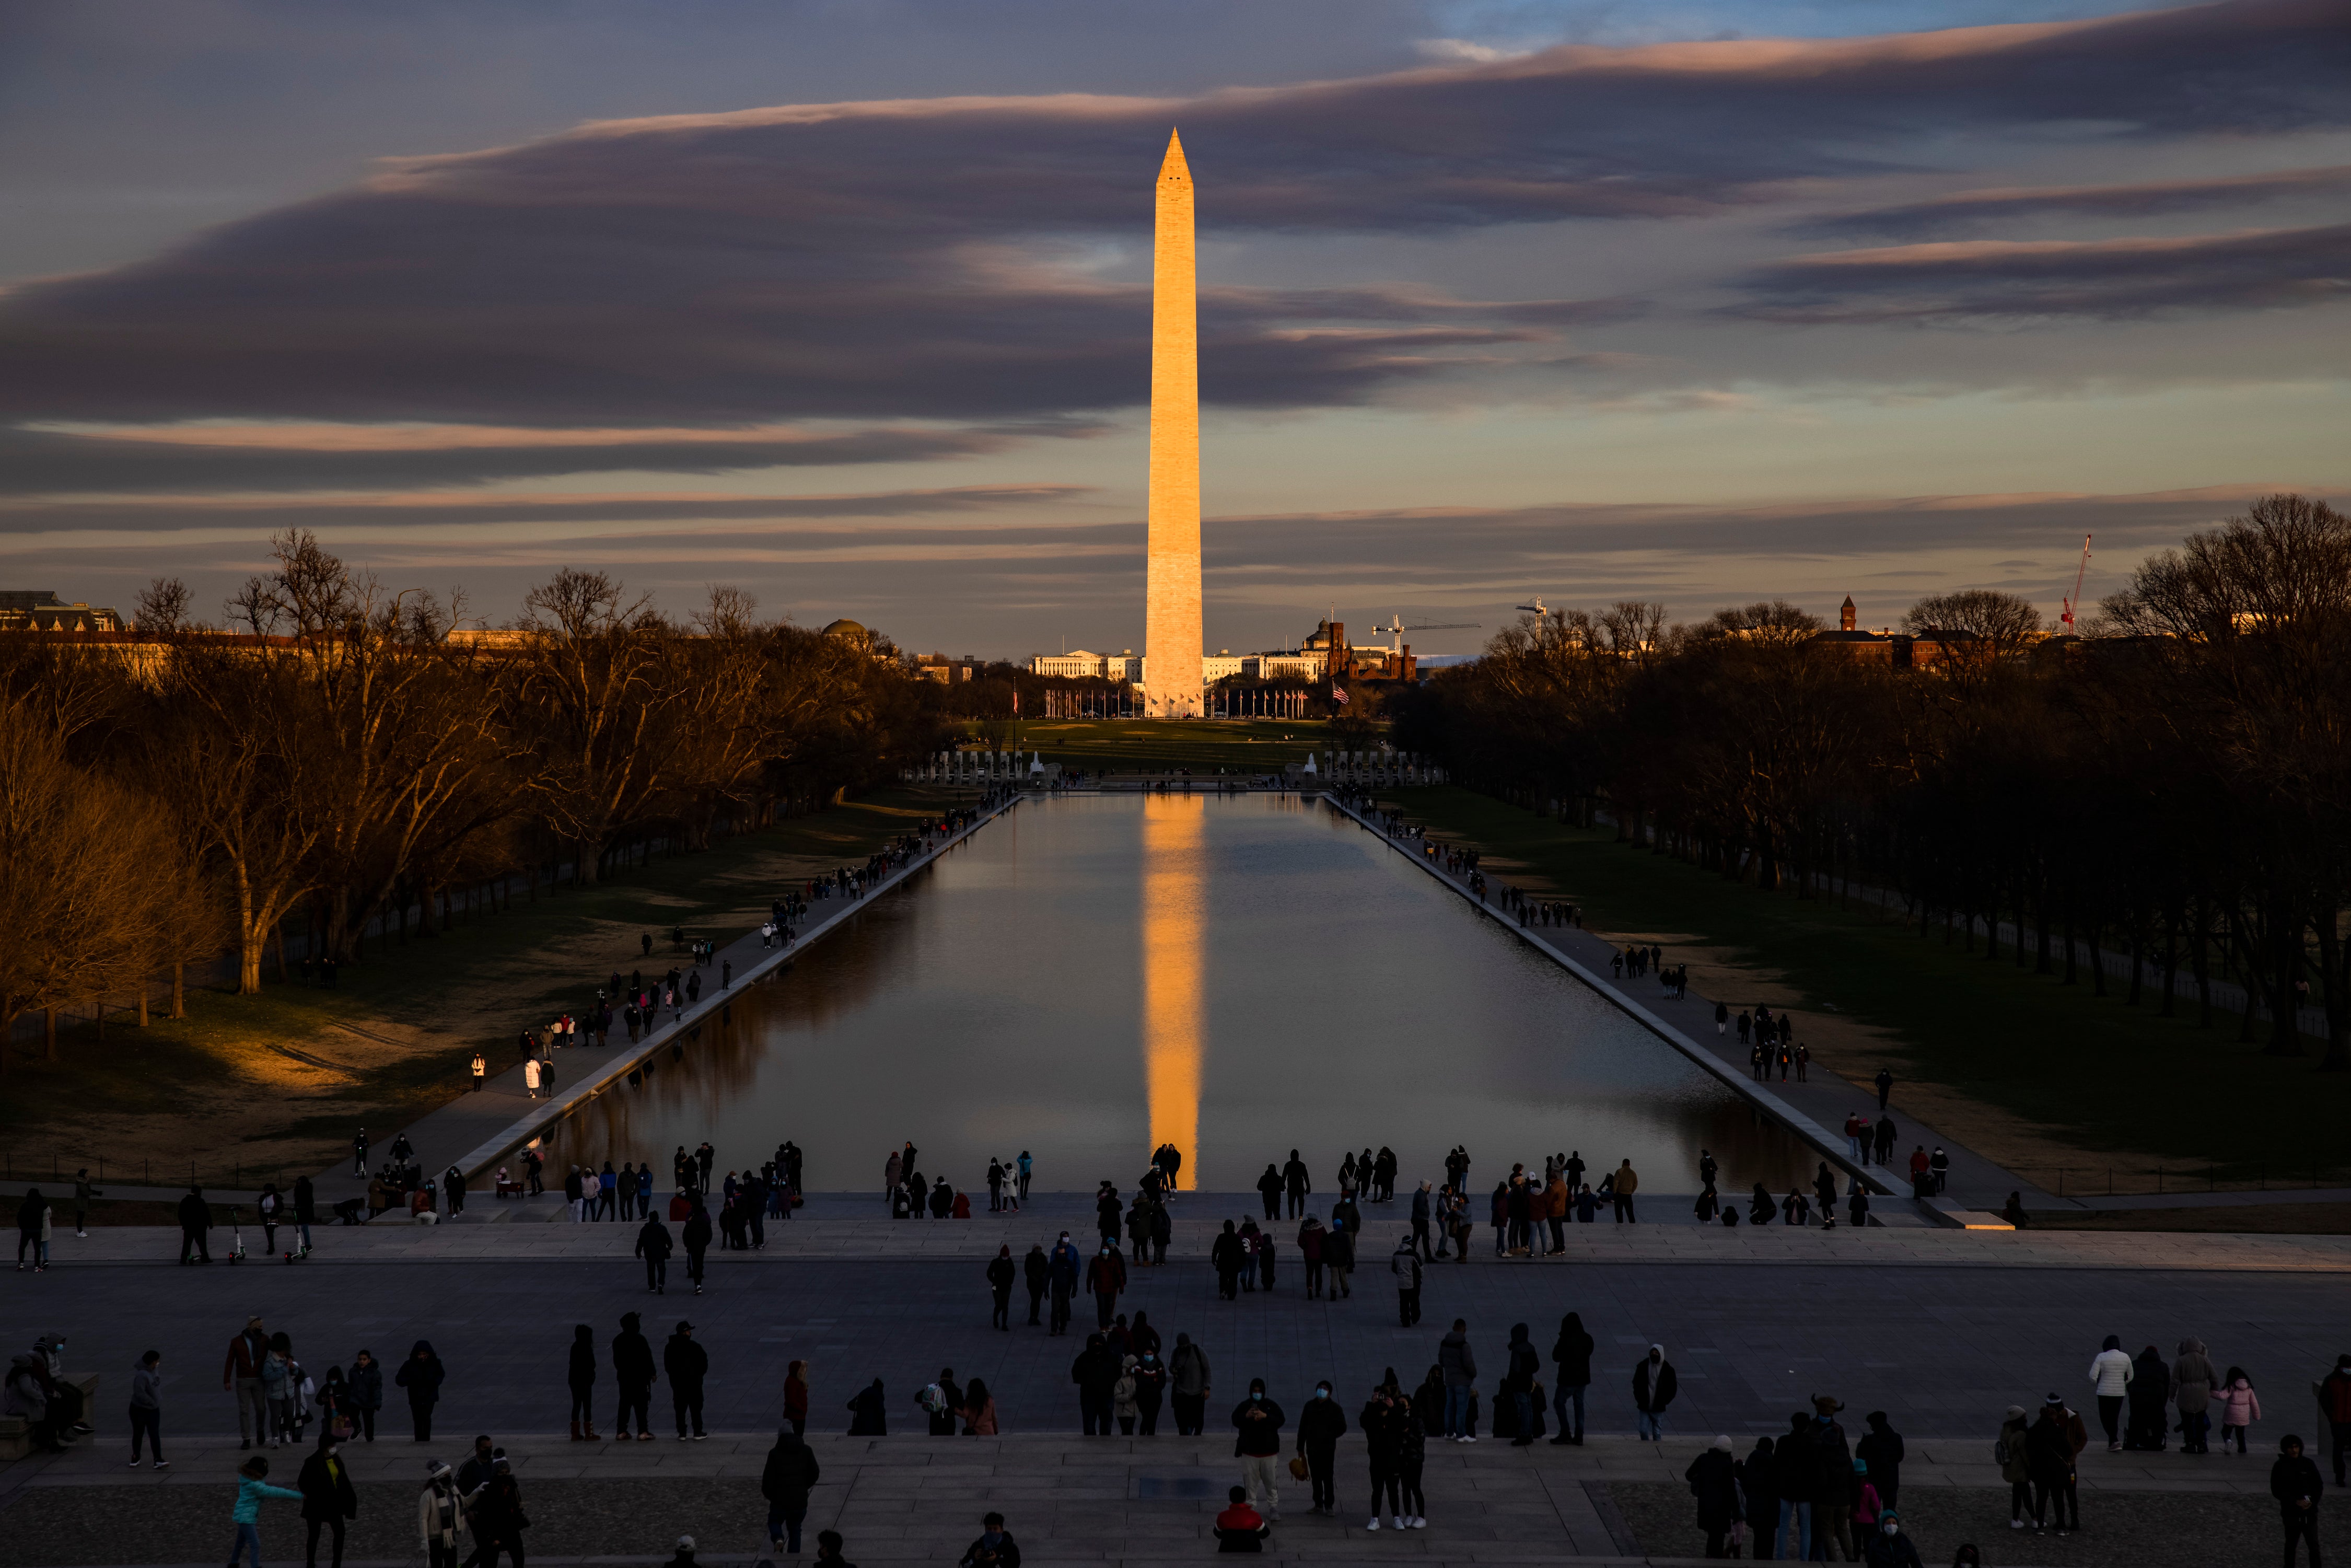 The area around the reflecting pool between the Lincoln Memorial and the Washington Monument will be illuminated in memory of the victims of the coronavirus pandemic